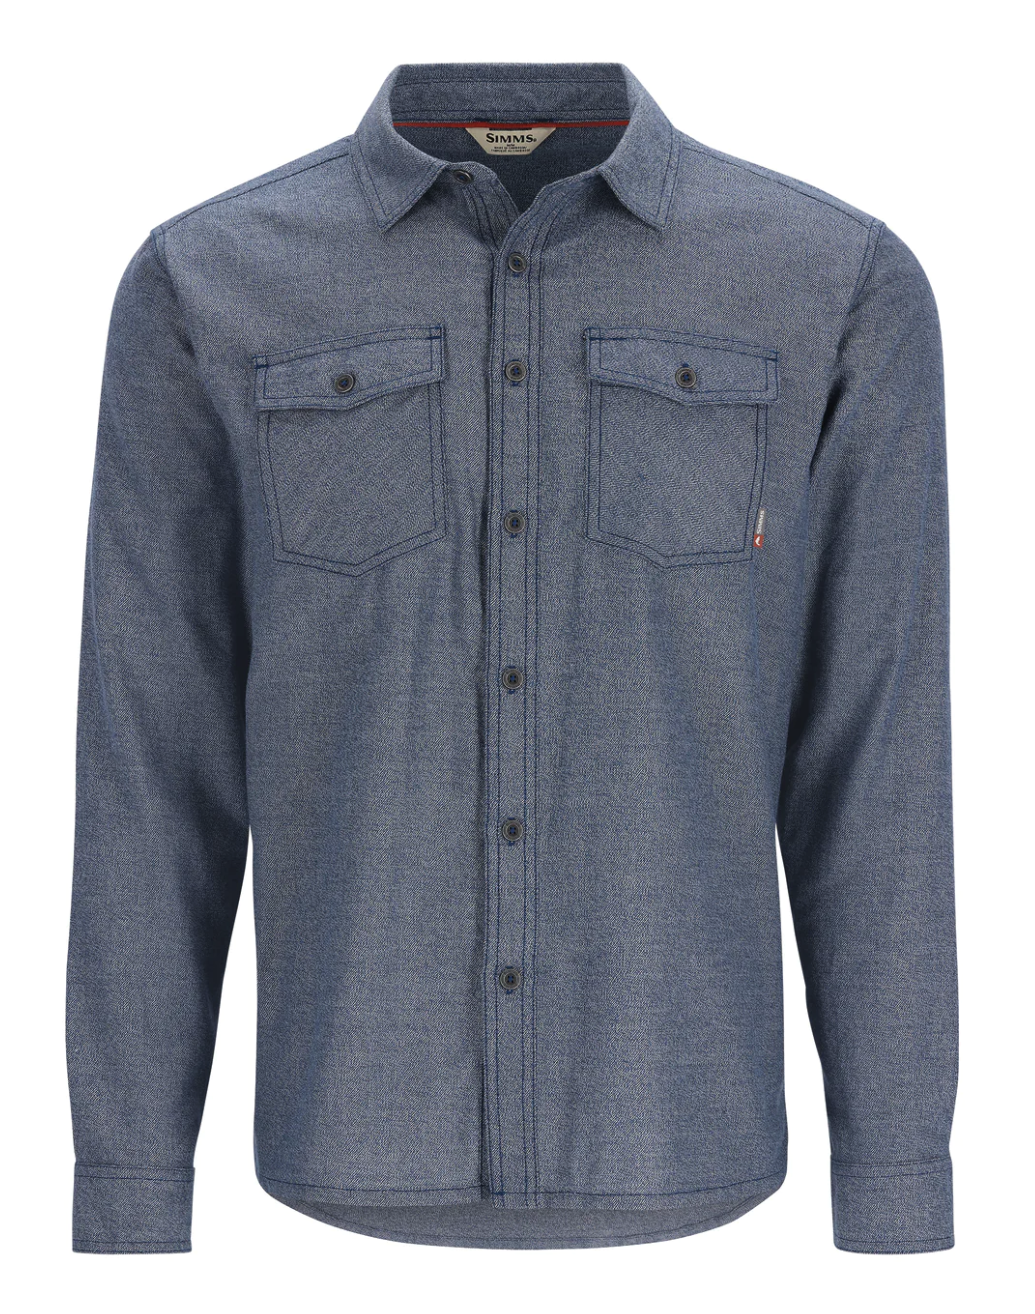 Order Simms Shoal Flannel Shirt online at TheFlyFishers.com